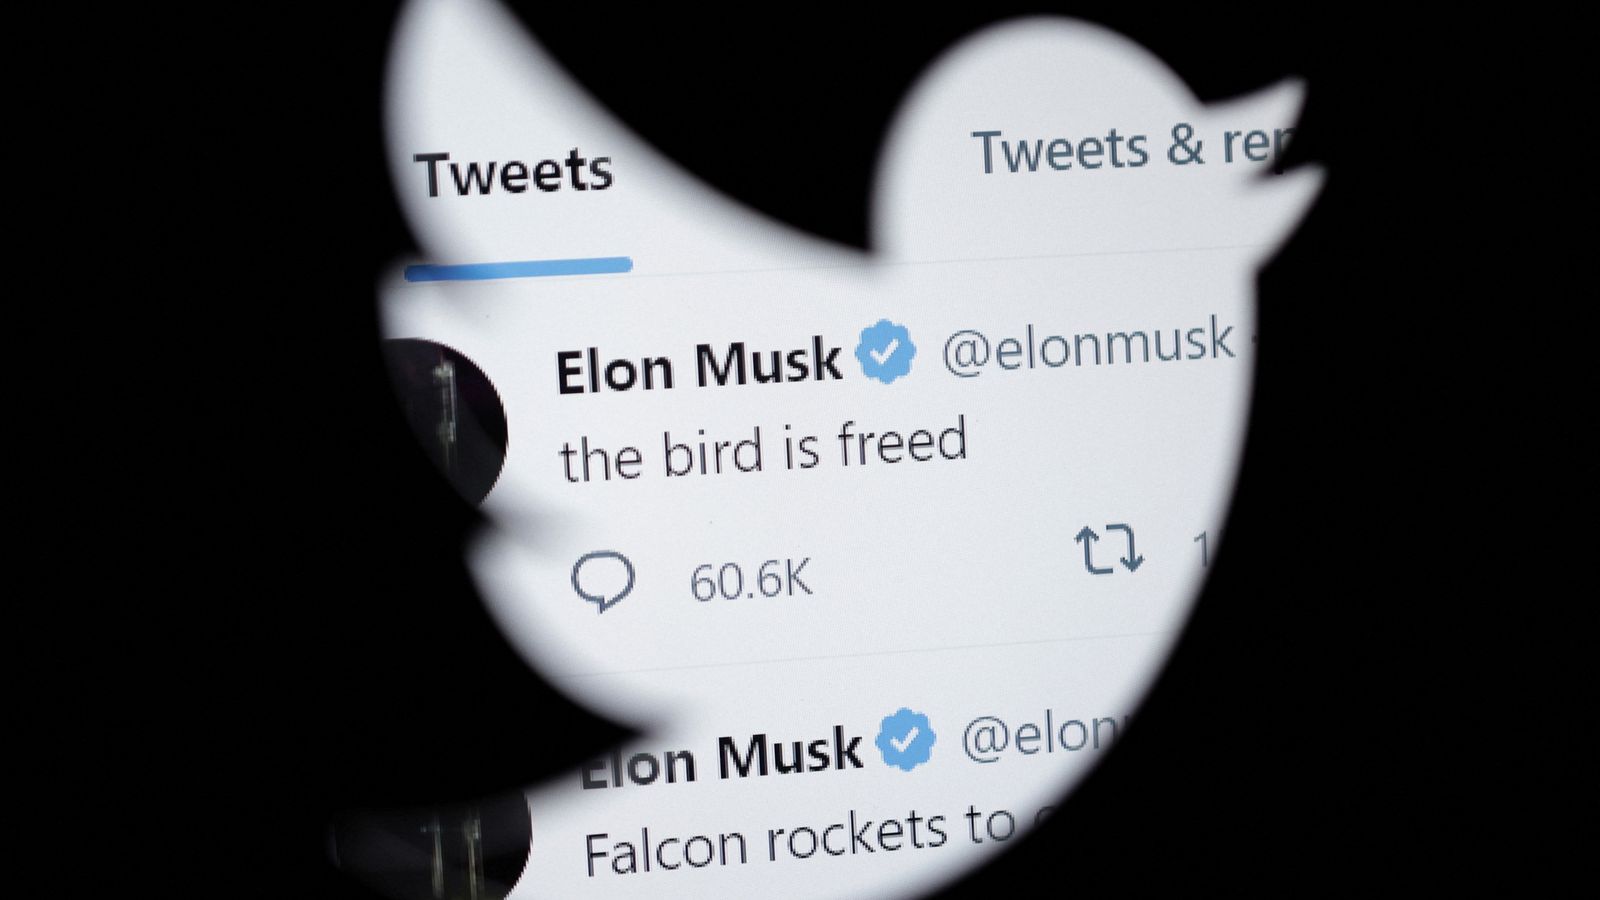 Largest US automaker temporarily halts paid advertising on Twitter after Elon Musk's takeover